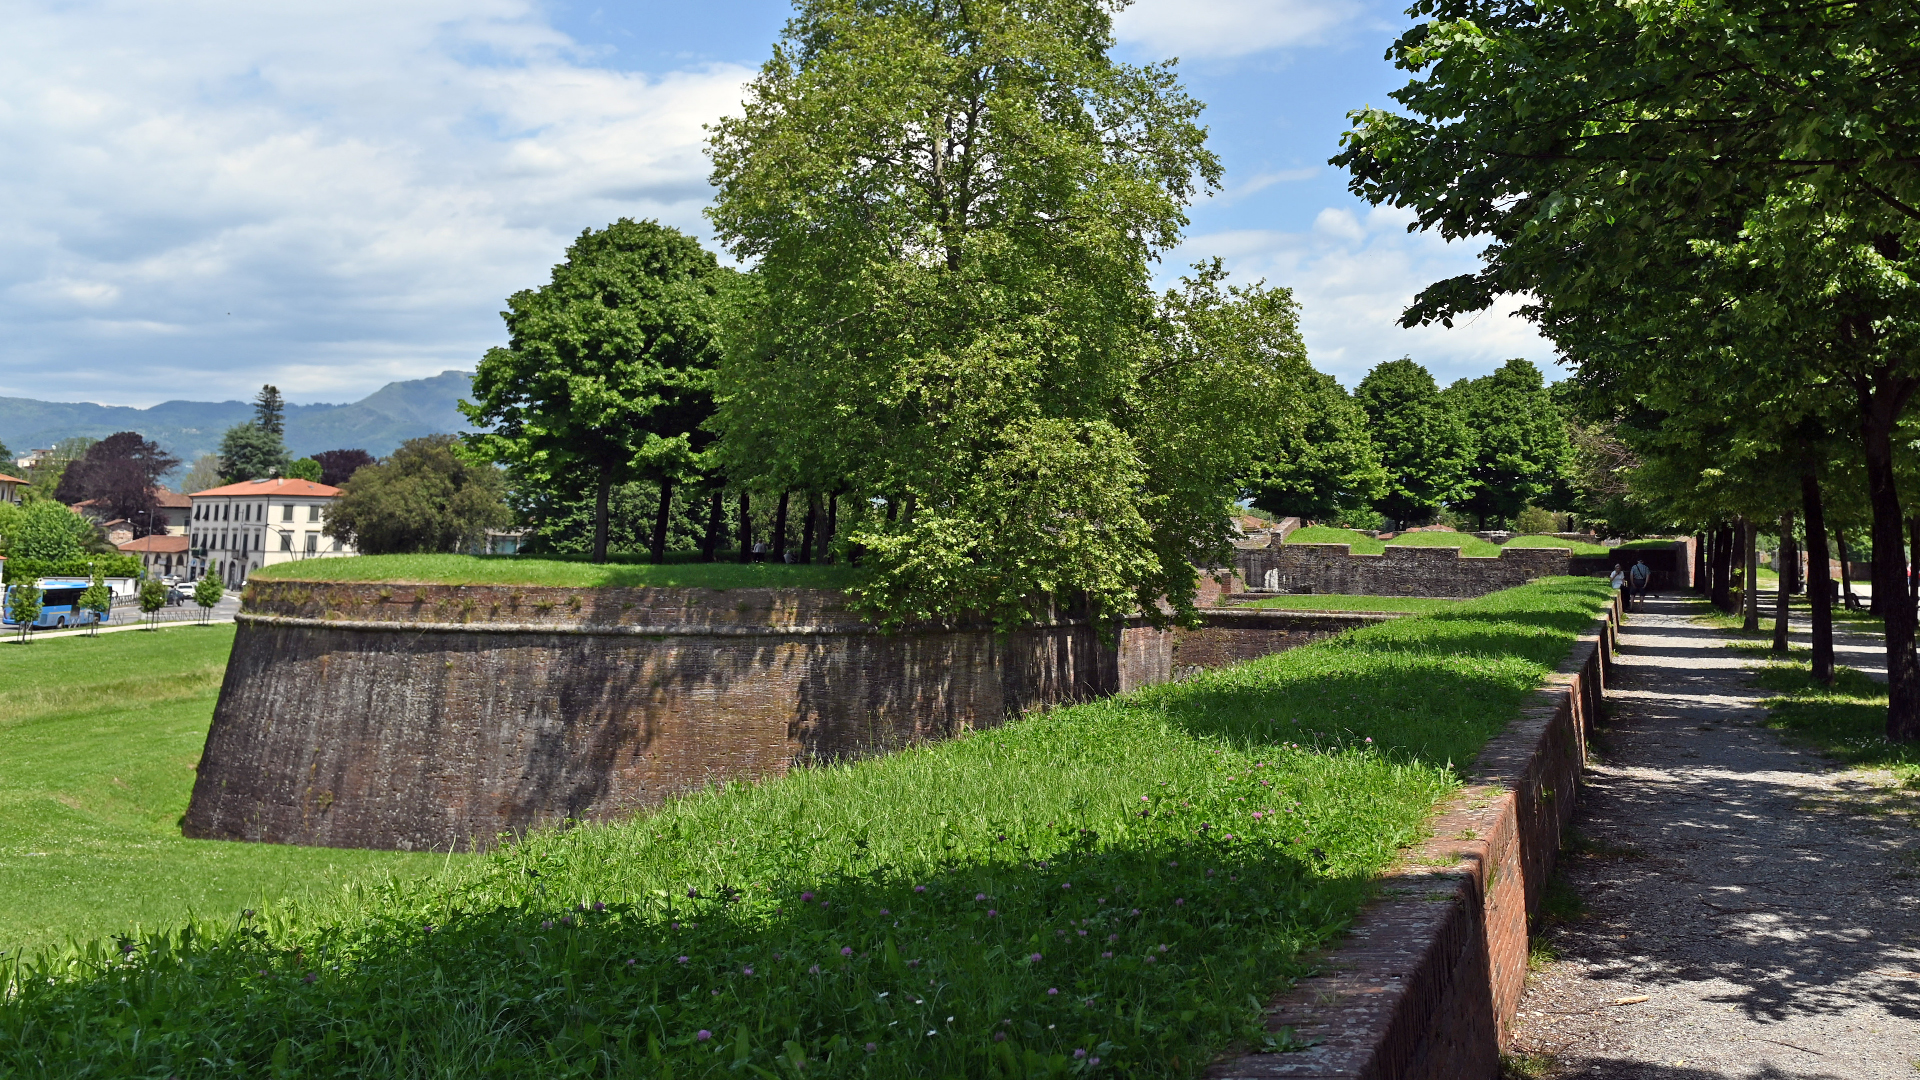 The ramparts of the Walls of Lucca